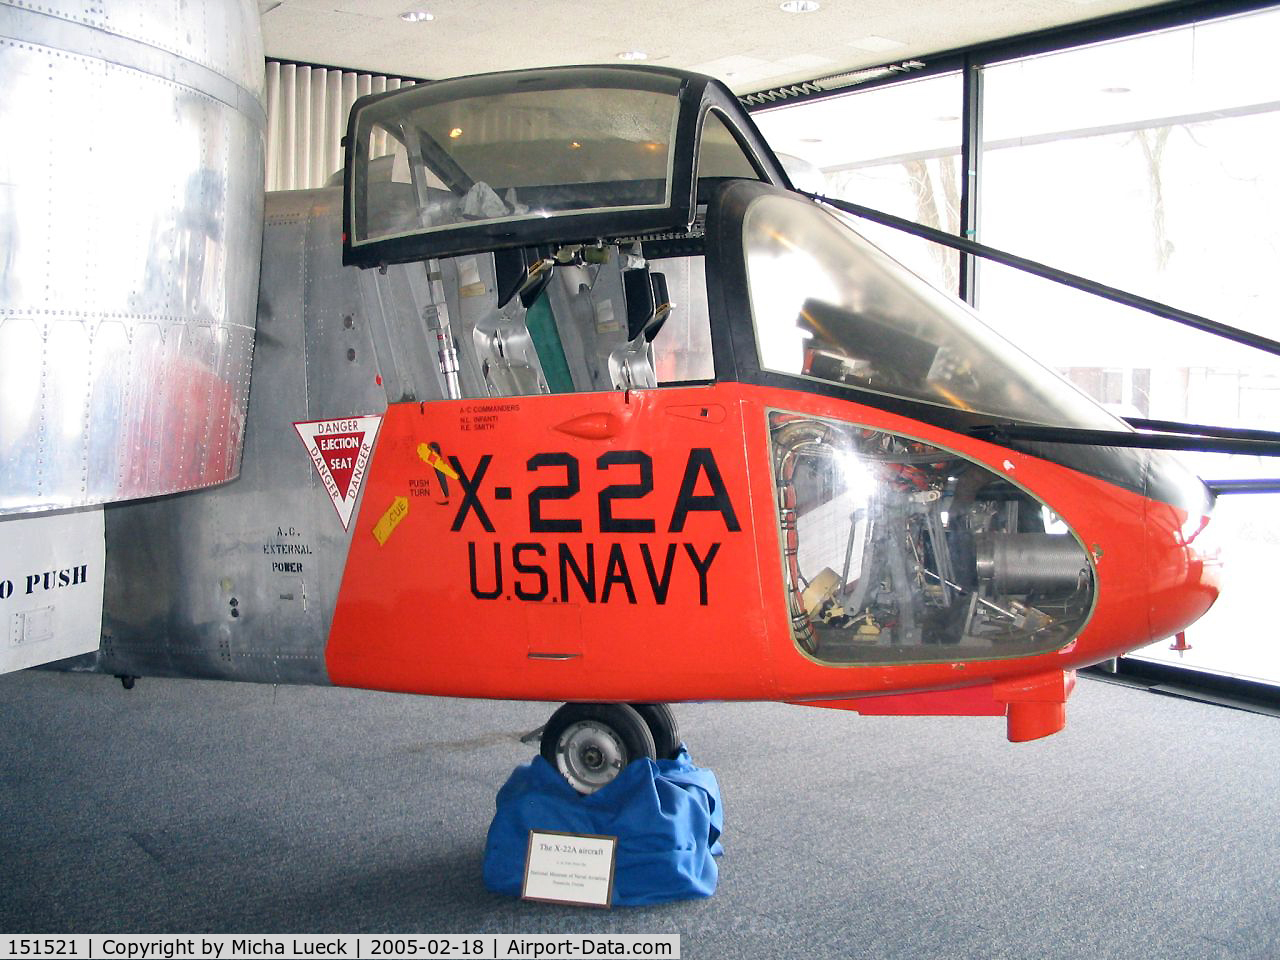 151521, 1966 Bell X-22A C/N 151521, The amazing Bell X22A vertical STOL aircraft, preserved in Niagara Falls